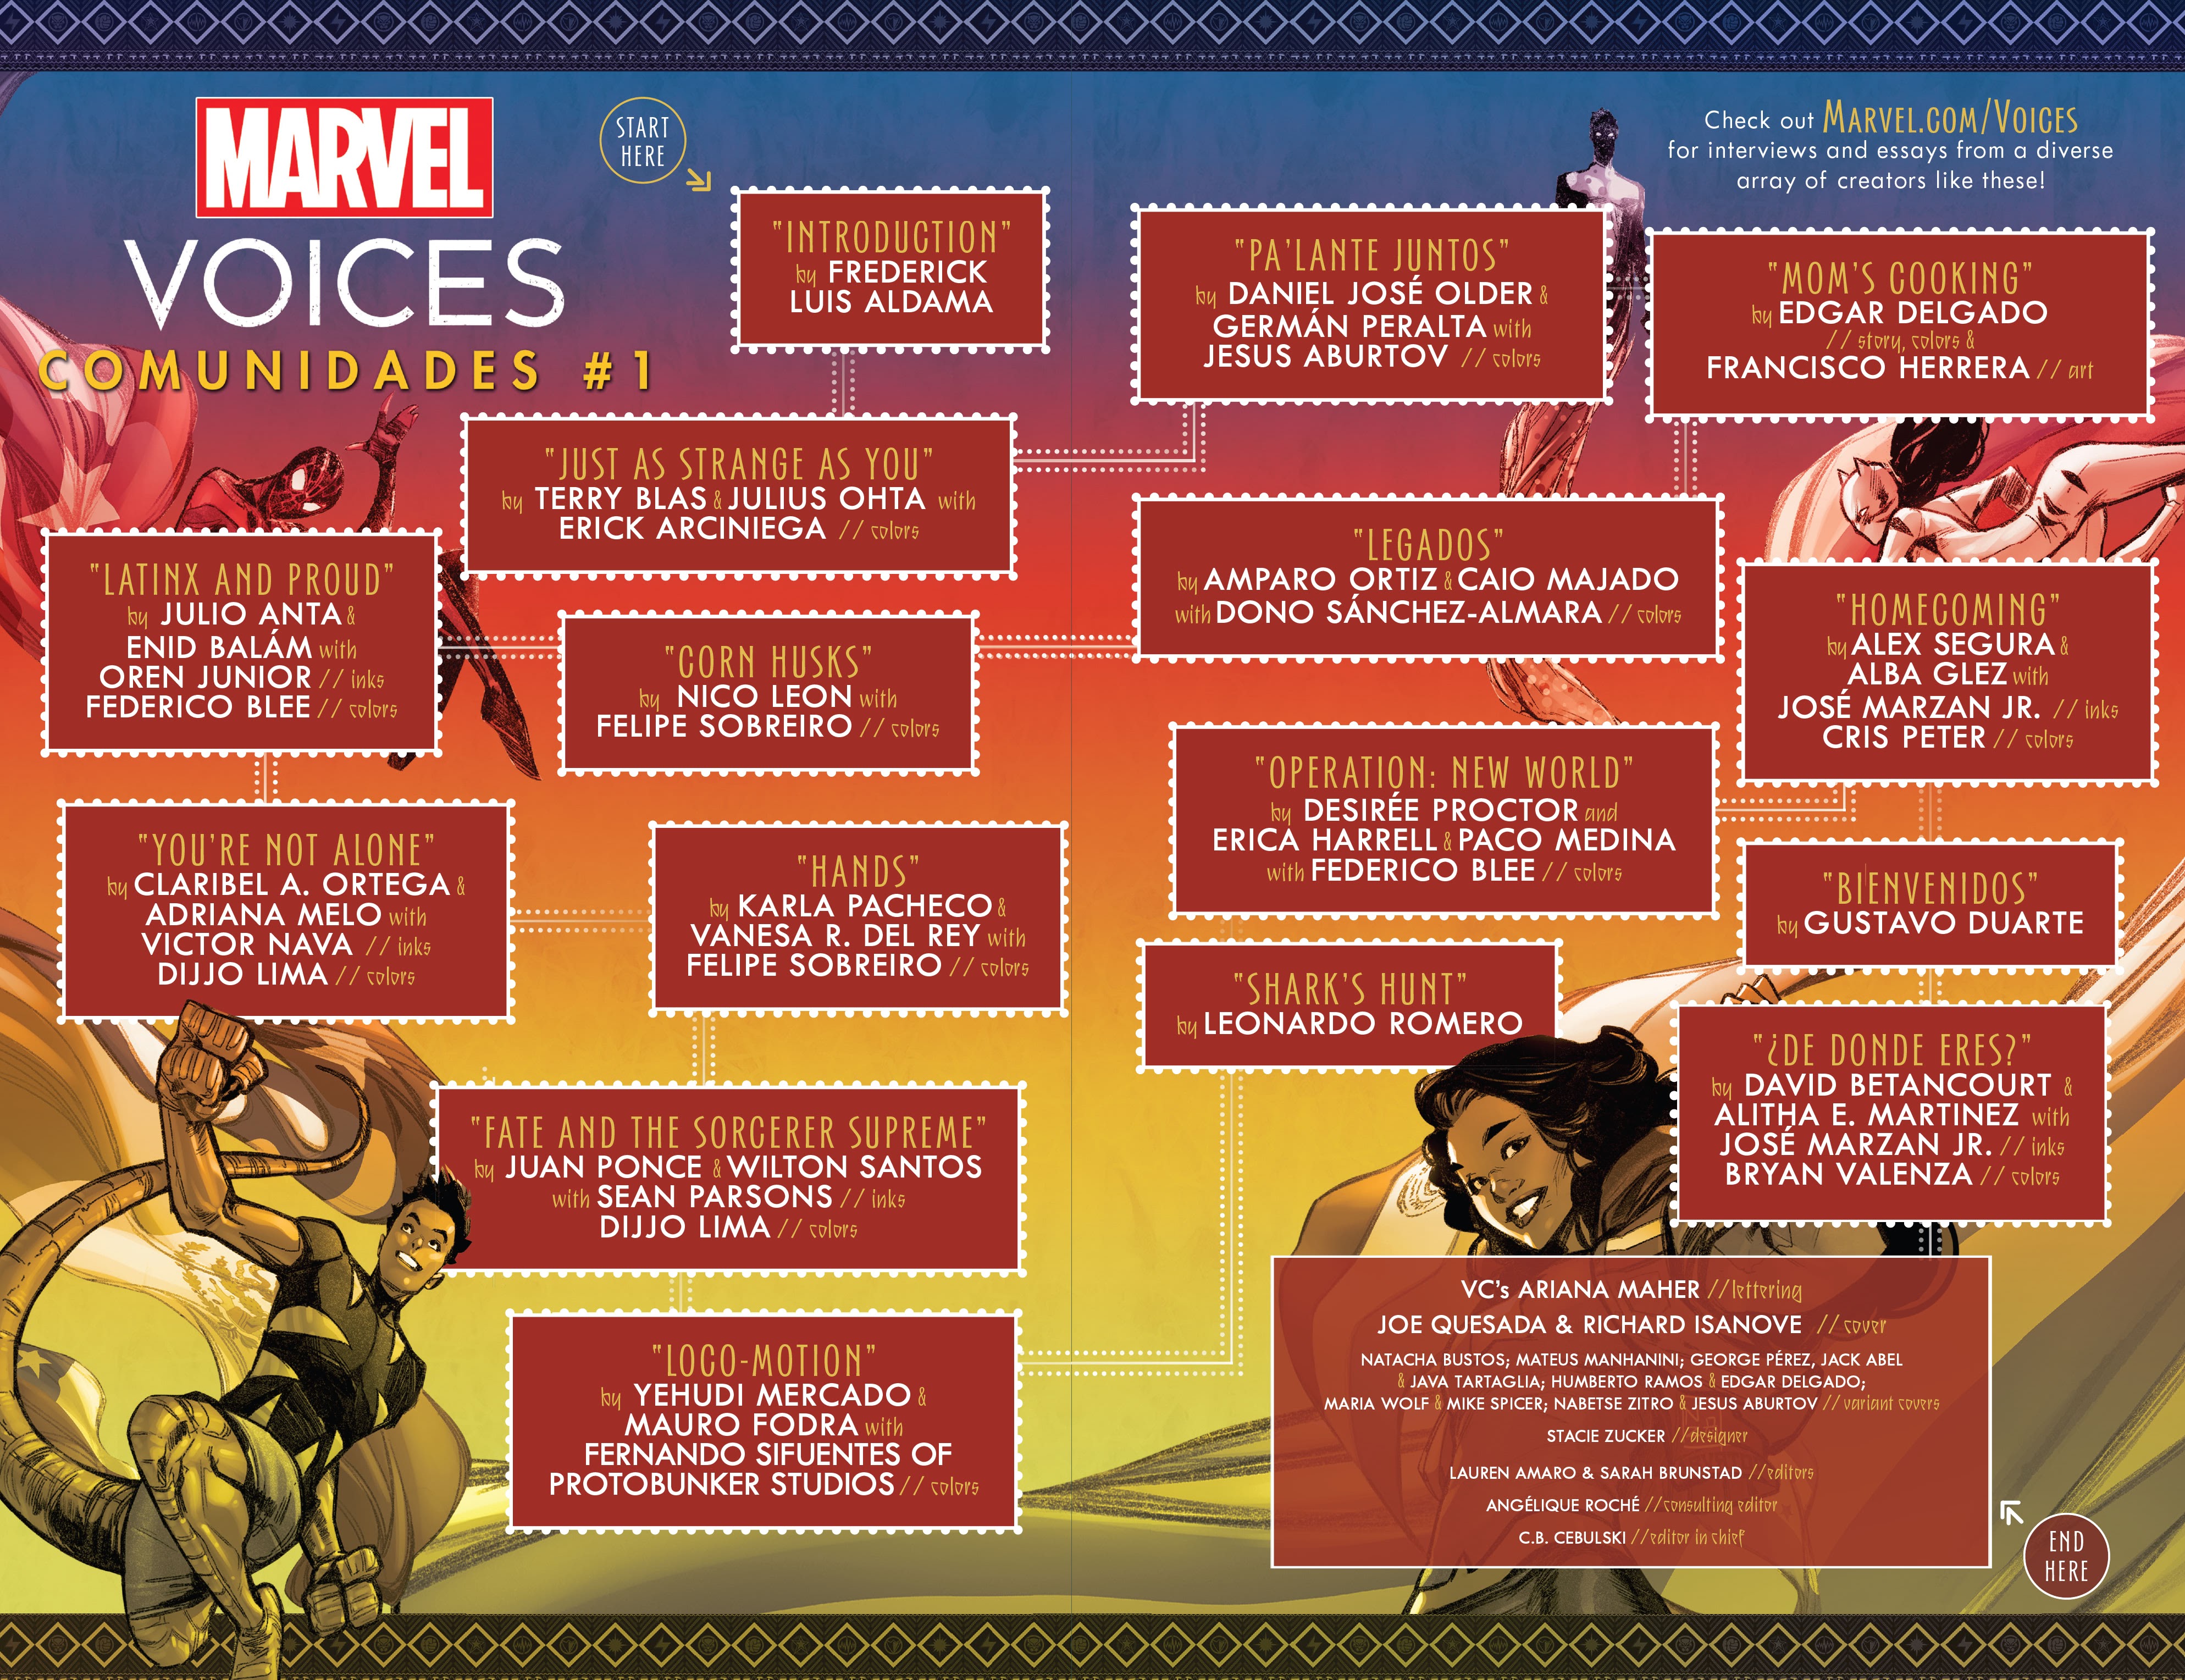 Read online Marvel's Voices: Community comic -  Issue # TPB - 3